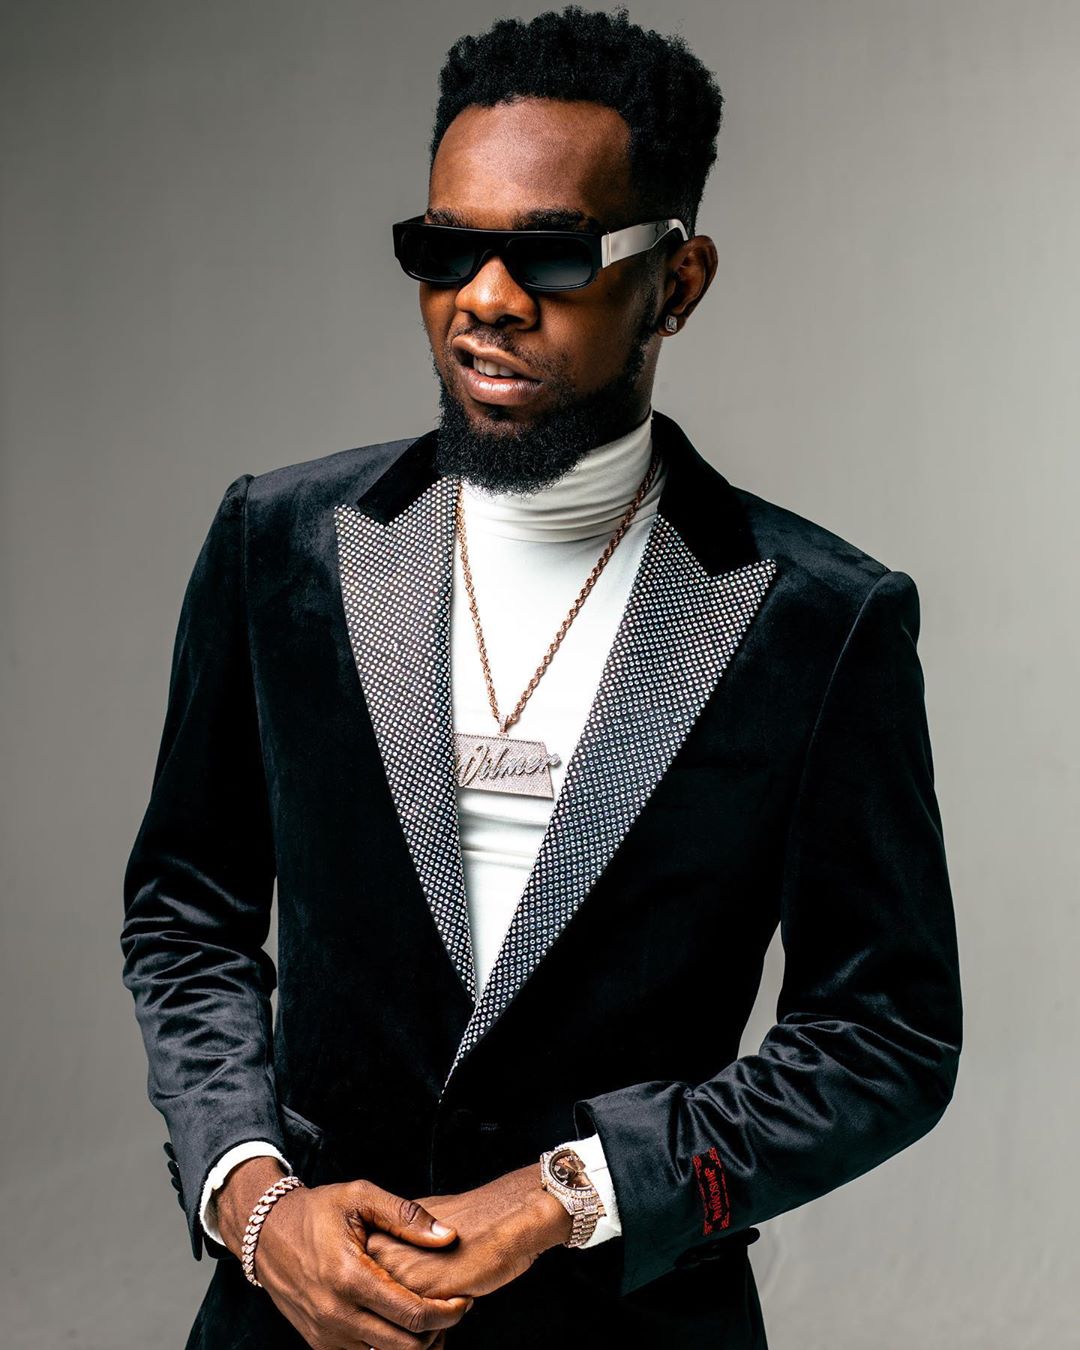 Patoranking Snubs Nigerian Musicians In Forthcoming Album, ‘Wilmer’